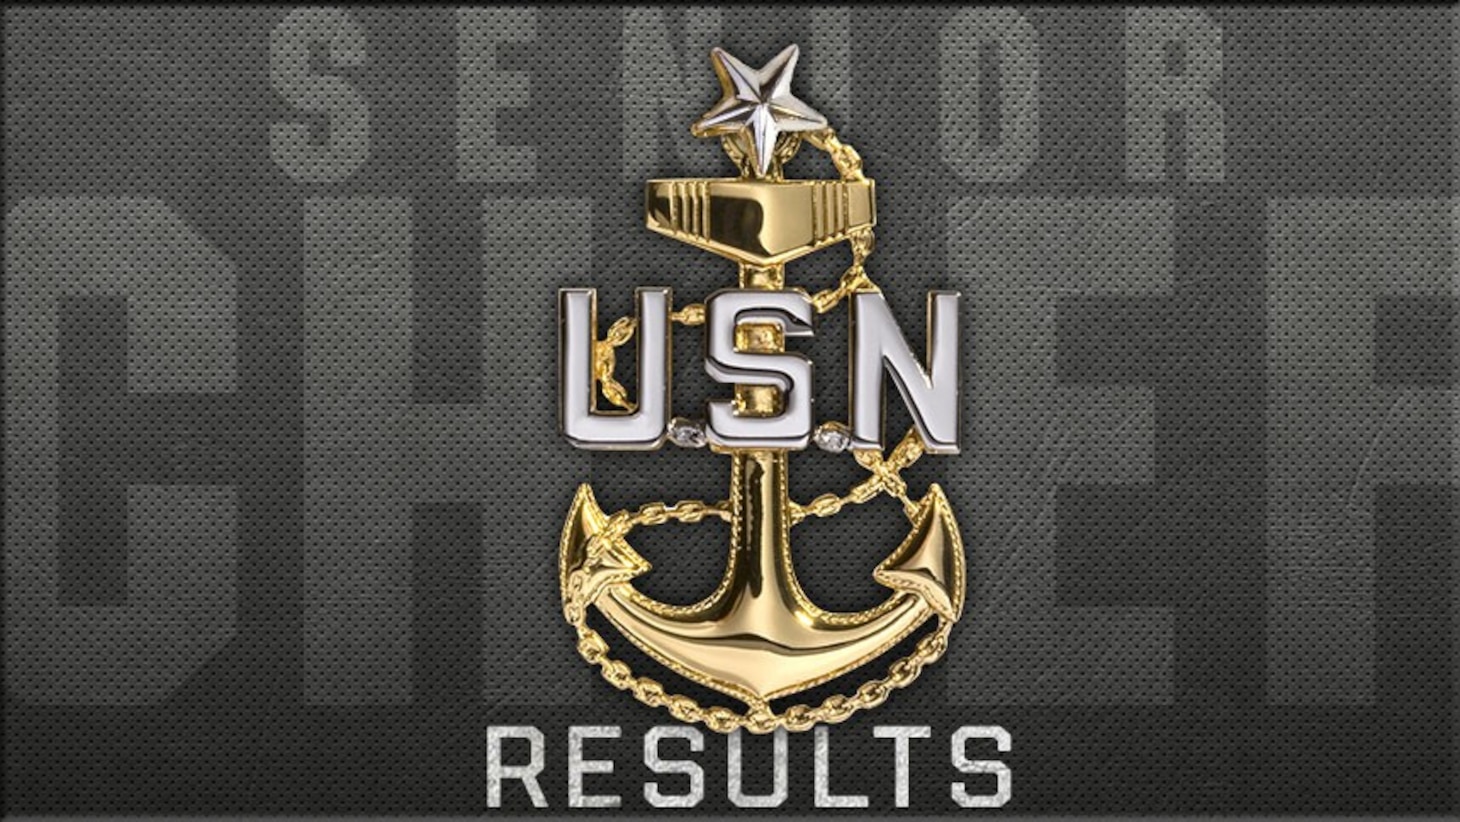 USN Ship Anchor on top of text "Senior Chief Results"